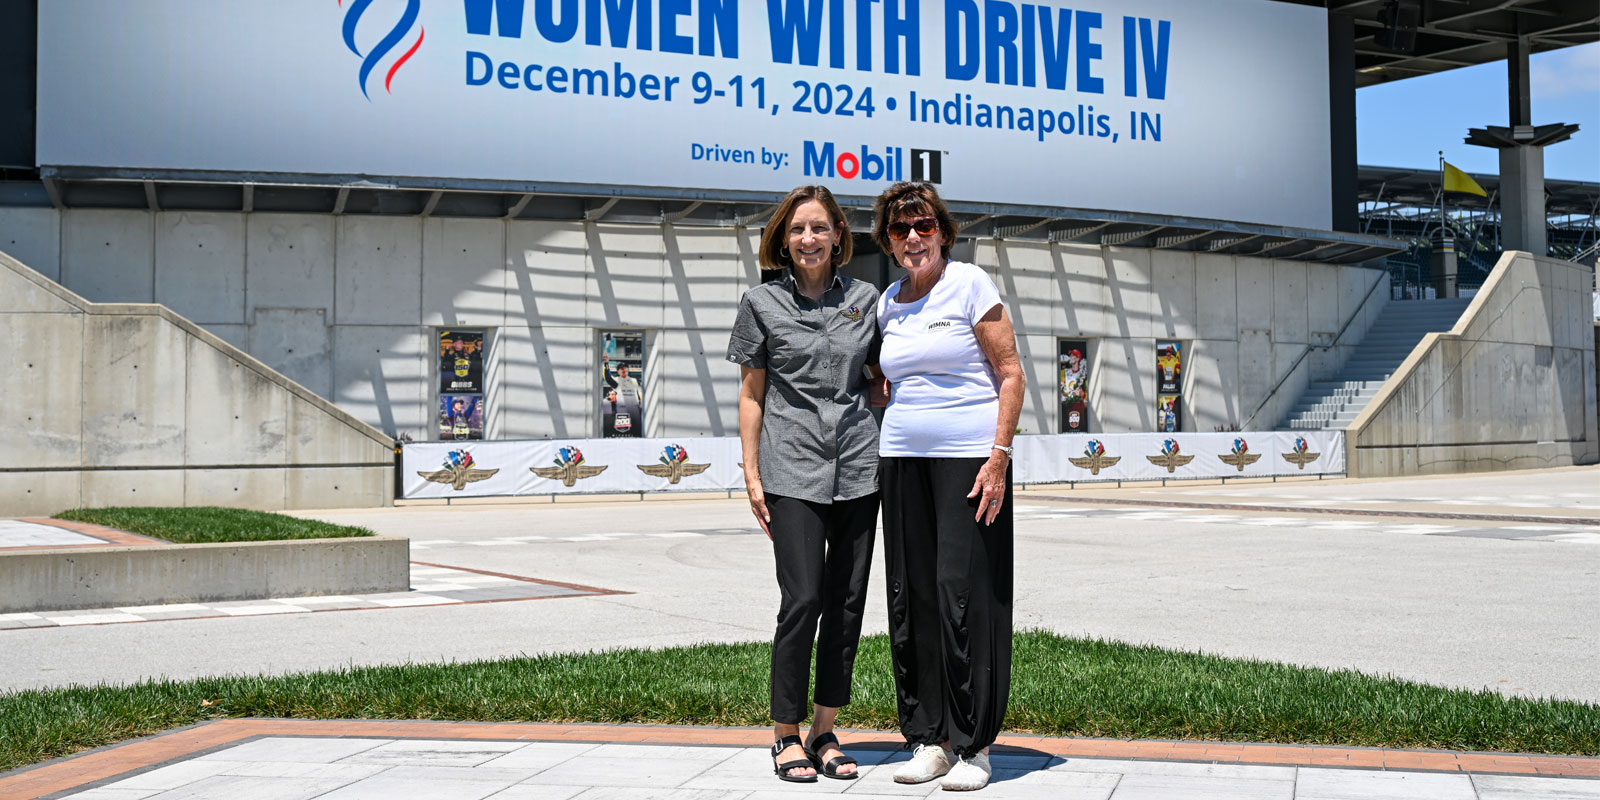 Allison Melangton and Lyn St. James pose in the plaza at Indianapolis Motor Speedway